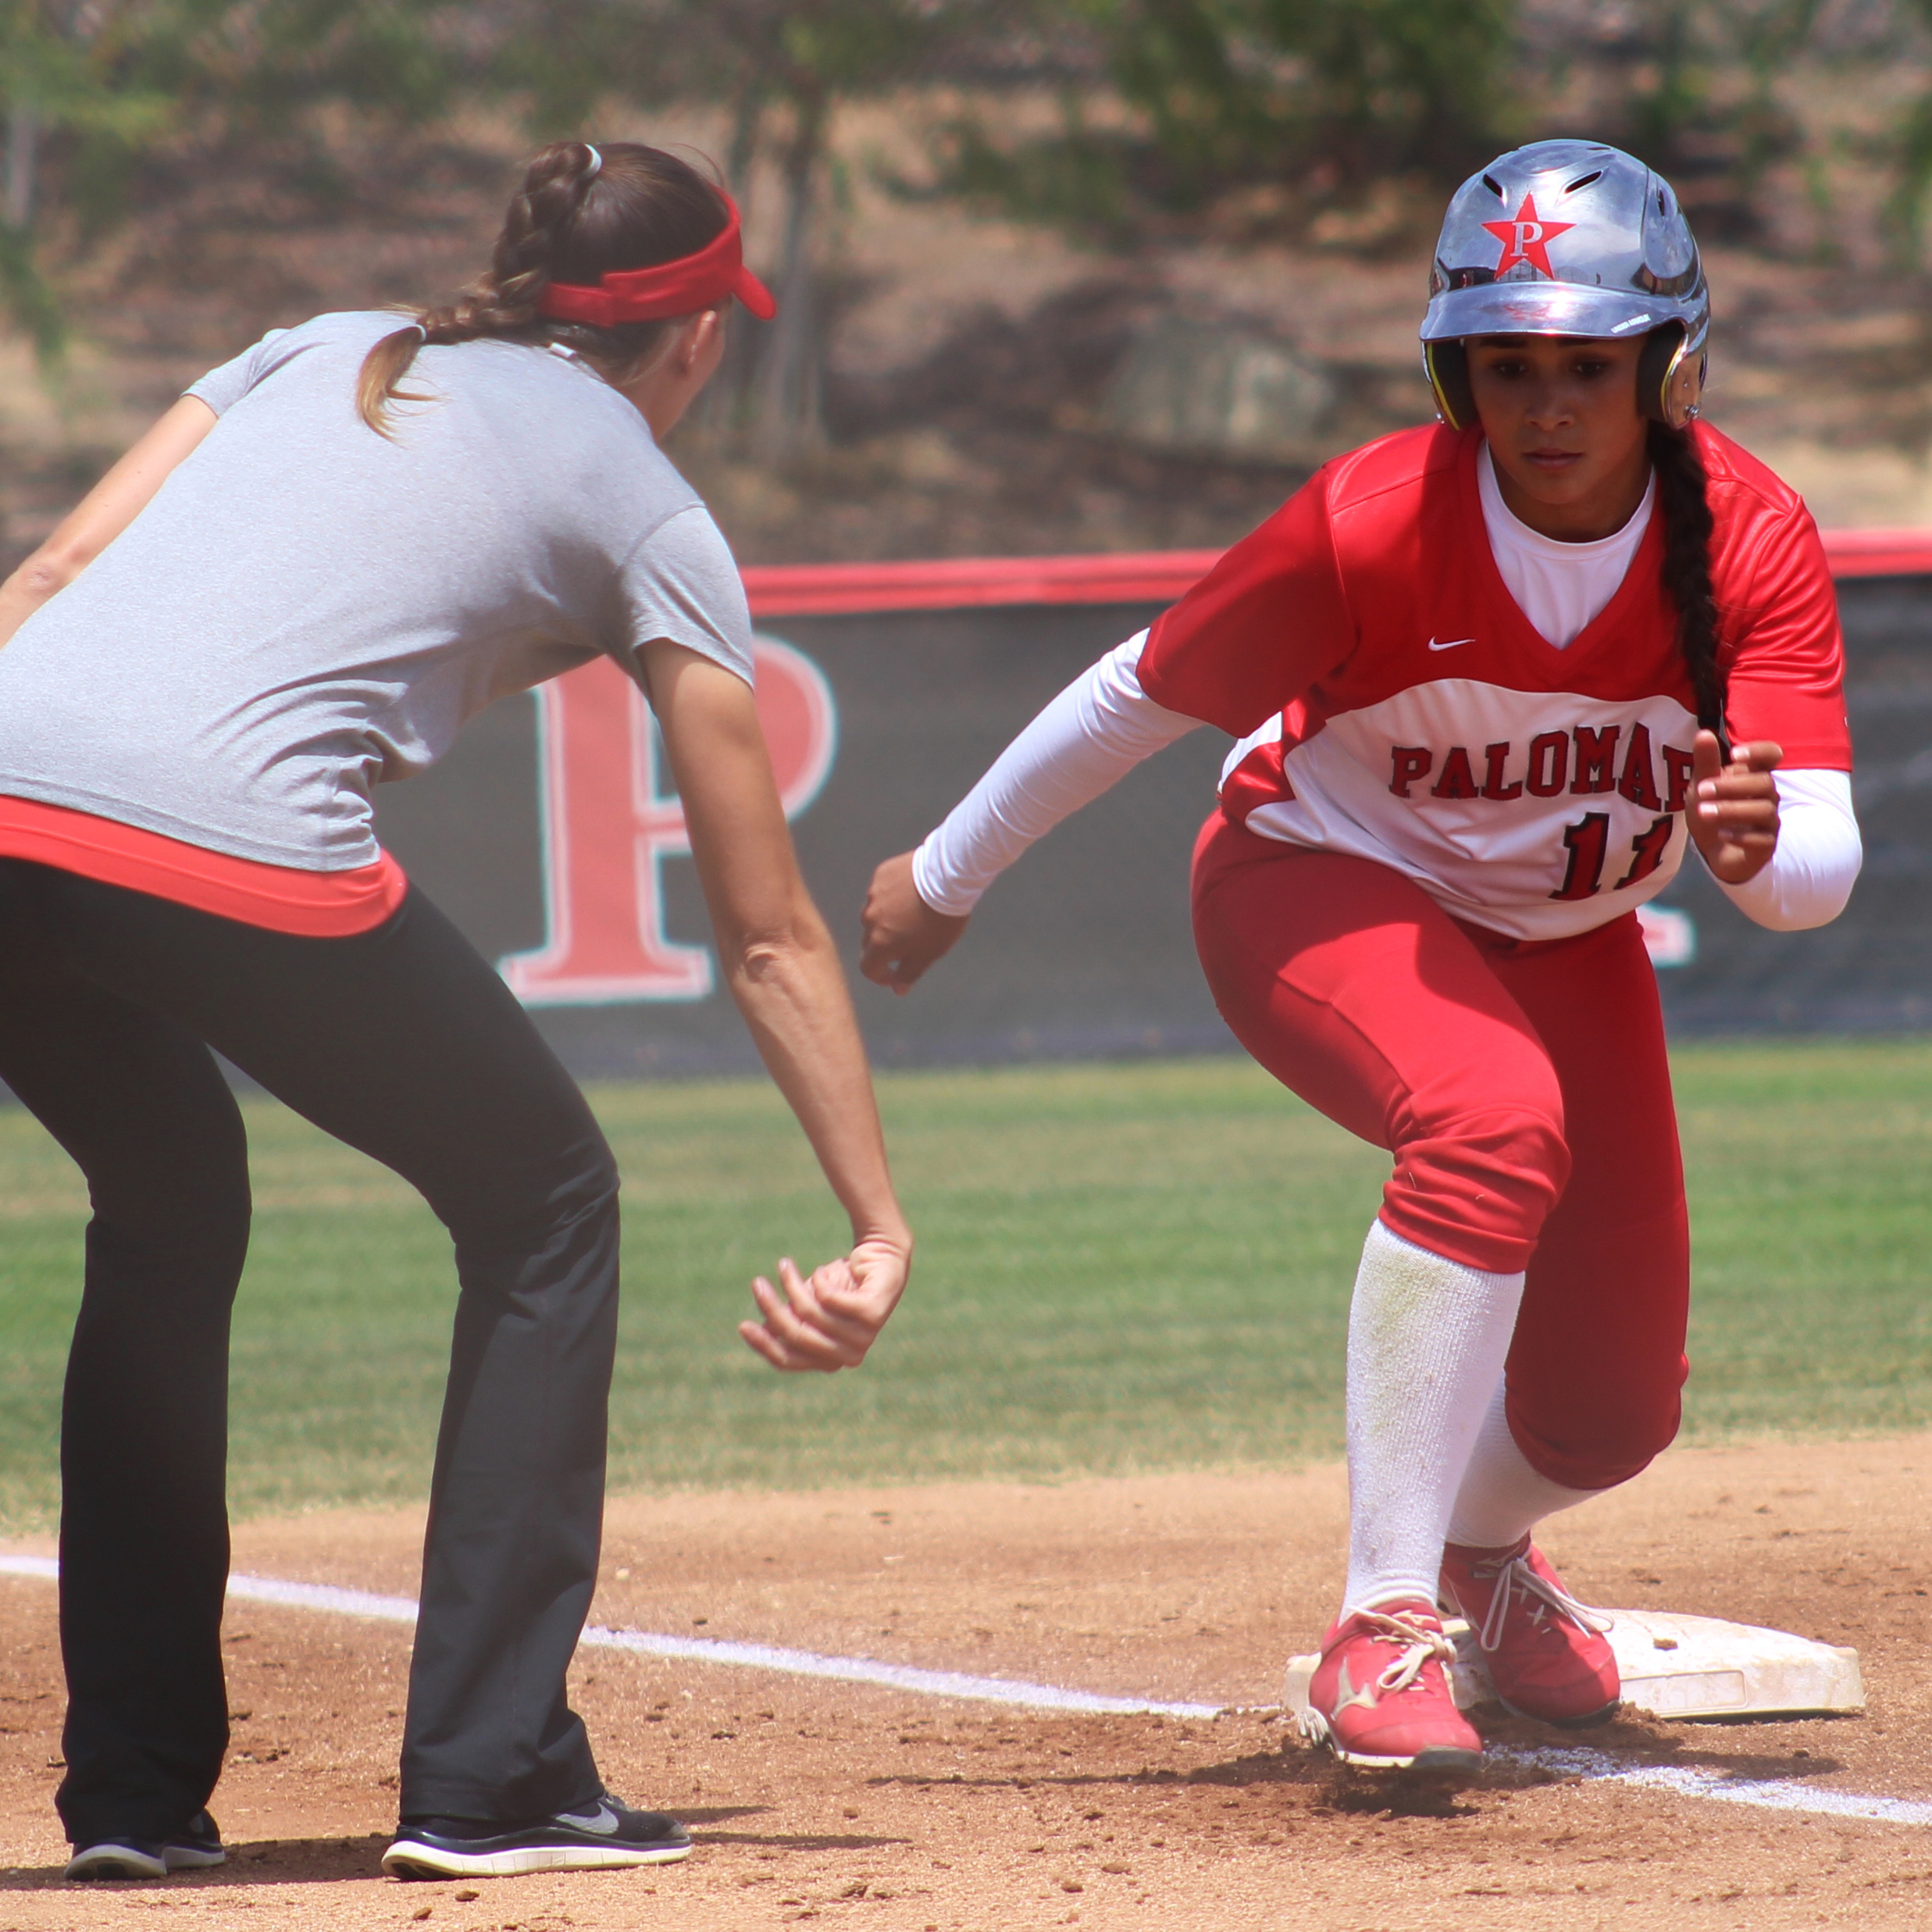 Palomar head softball coach Lacey Craft signals to outfielder Keilani ‘KK’ Fronda to tag up from third base on Carlie Daniel’s sacrifice fly in the 1st inning against Imperial Valley College on April 23 at Palomar’s softball field. Fronda hit for the cycle with 2 homeruns, a triple, double, single, and 8 RBI’s in the Comet’s 25-0 win over the Arabs. The win gave the Comet’s a perfect 18-0 conference record for the first time since 2005. Scott Colson/The Telescope